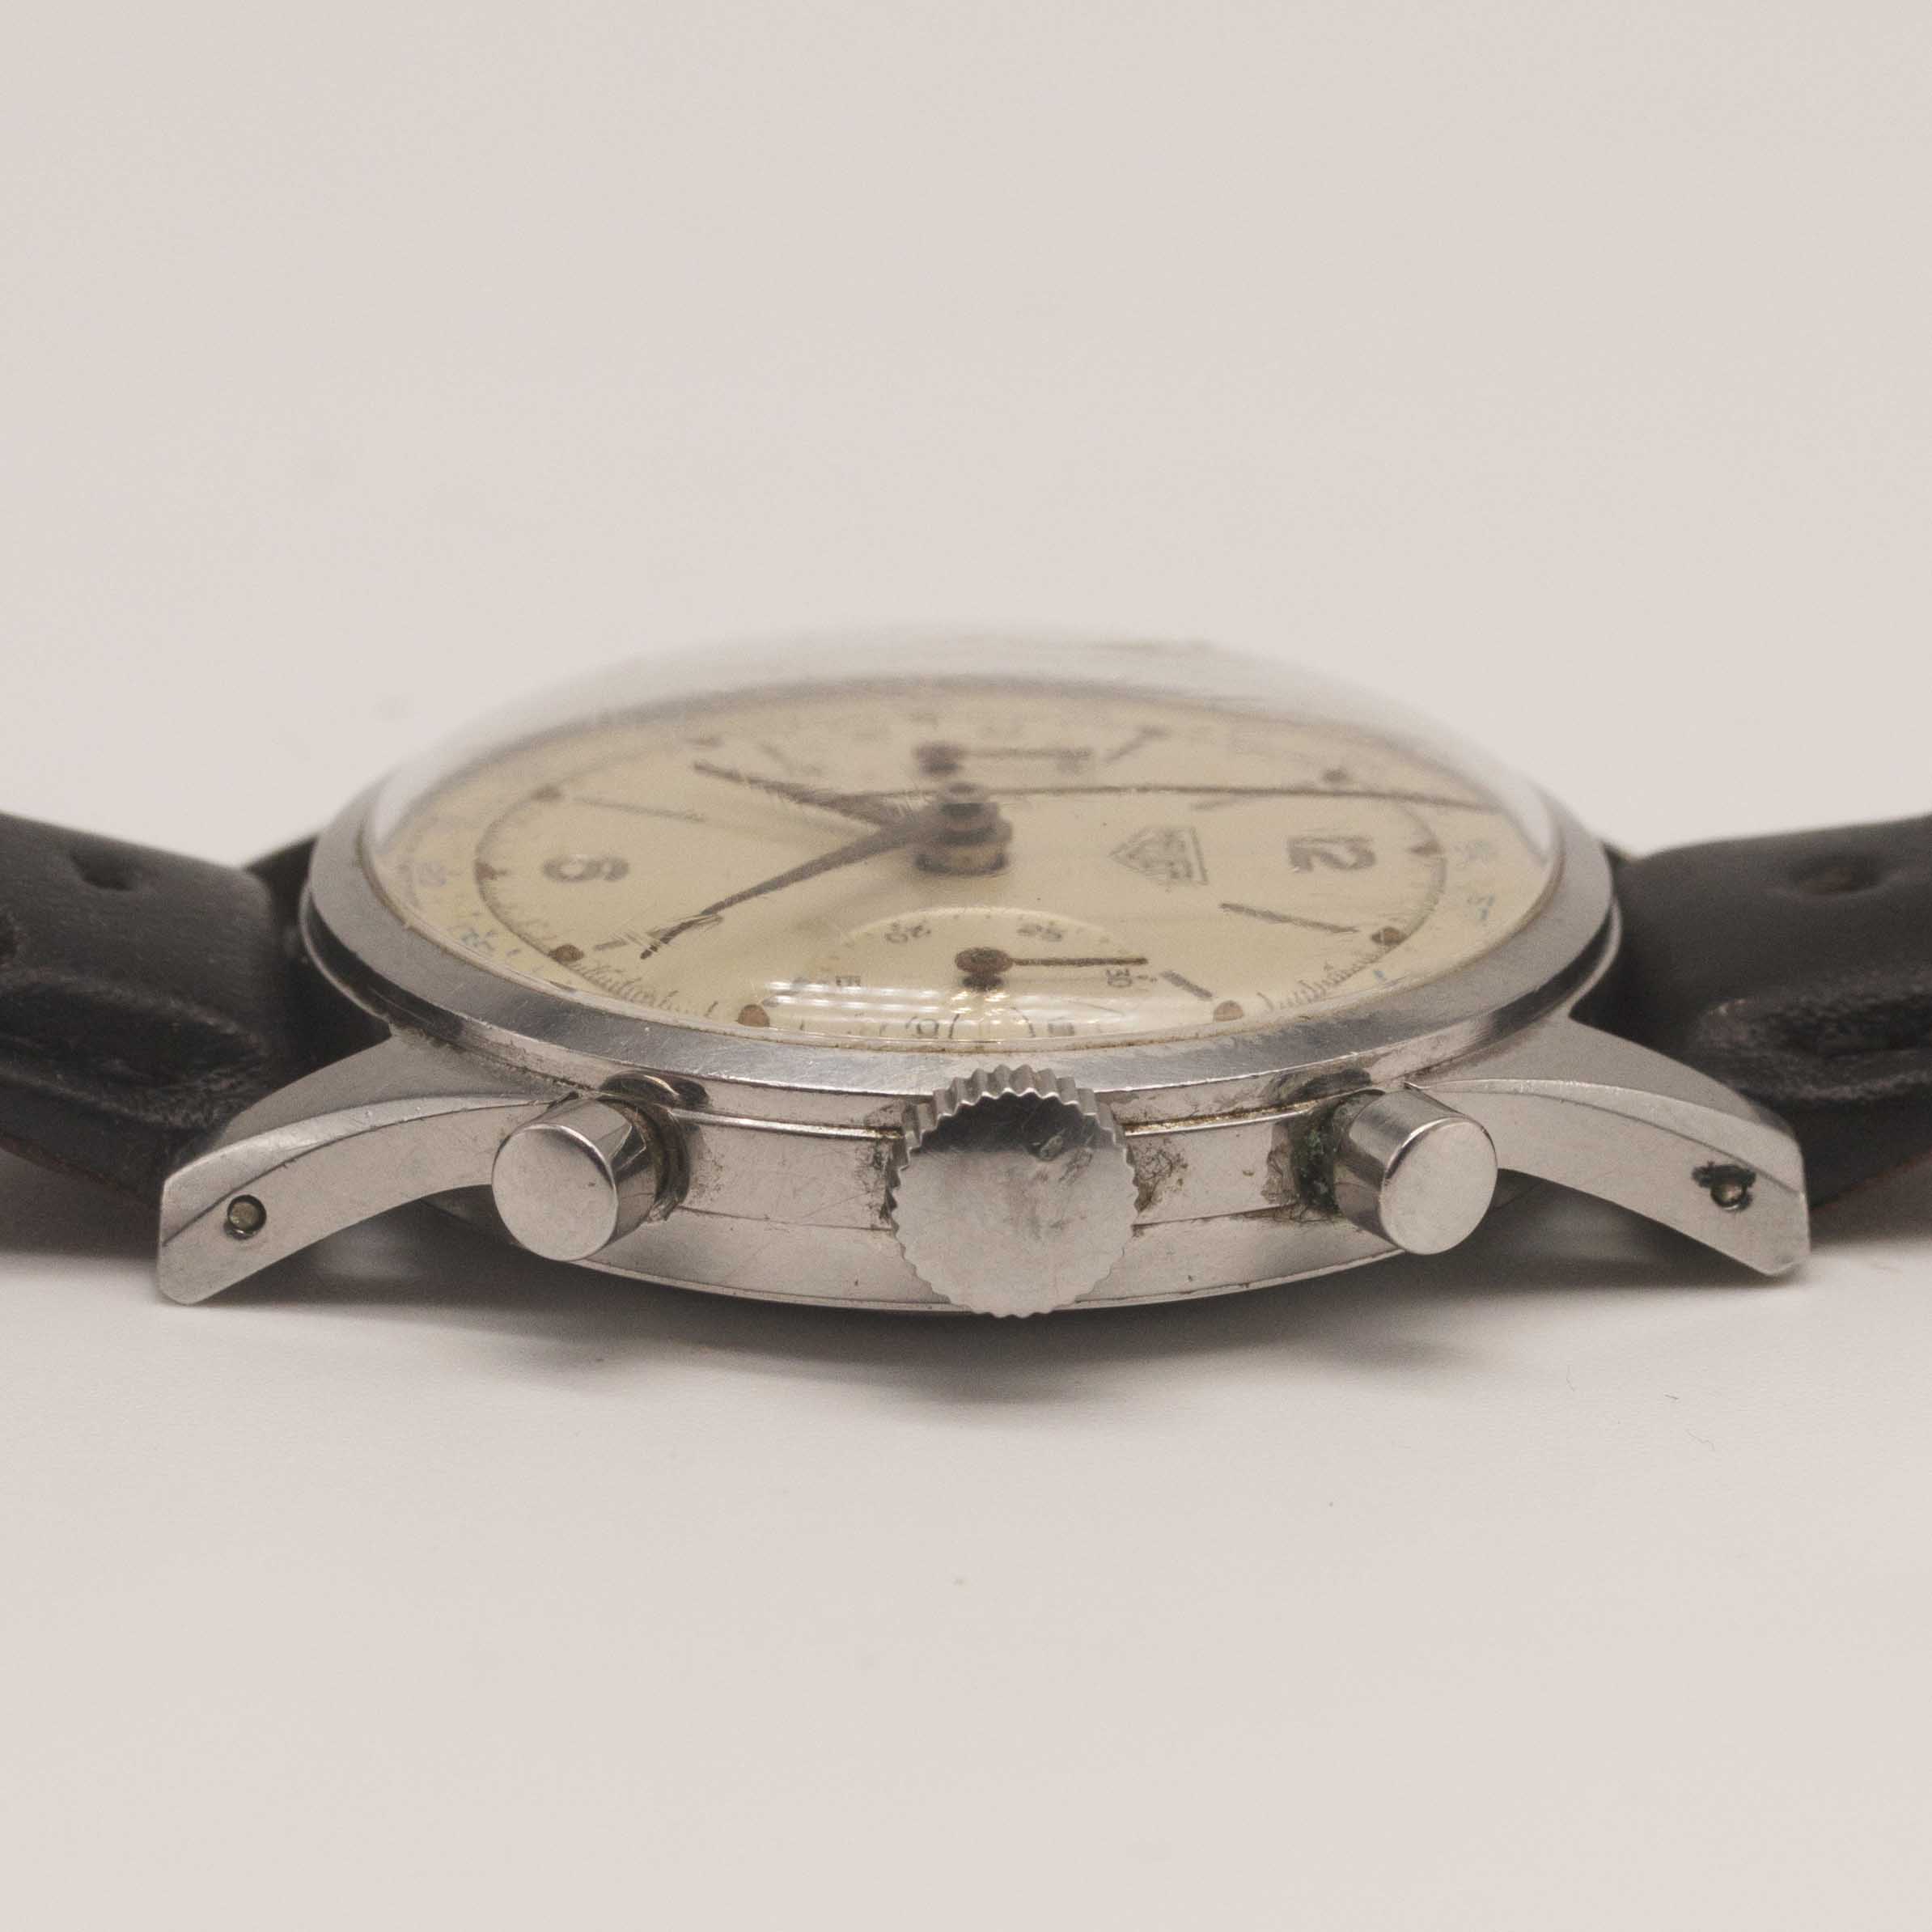 A RARE GENTLEMAN'S LARGE SIZE STAINLESS STEEL HEUER "WATERPROOF" CHRONOGRAPH WRIST WATCH CIRCA - Image 10 of 11